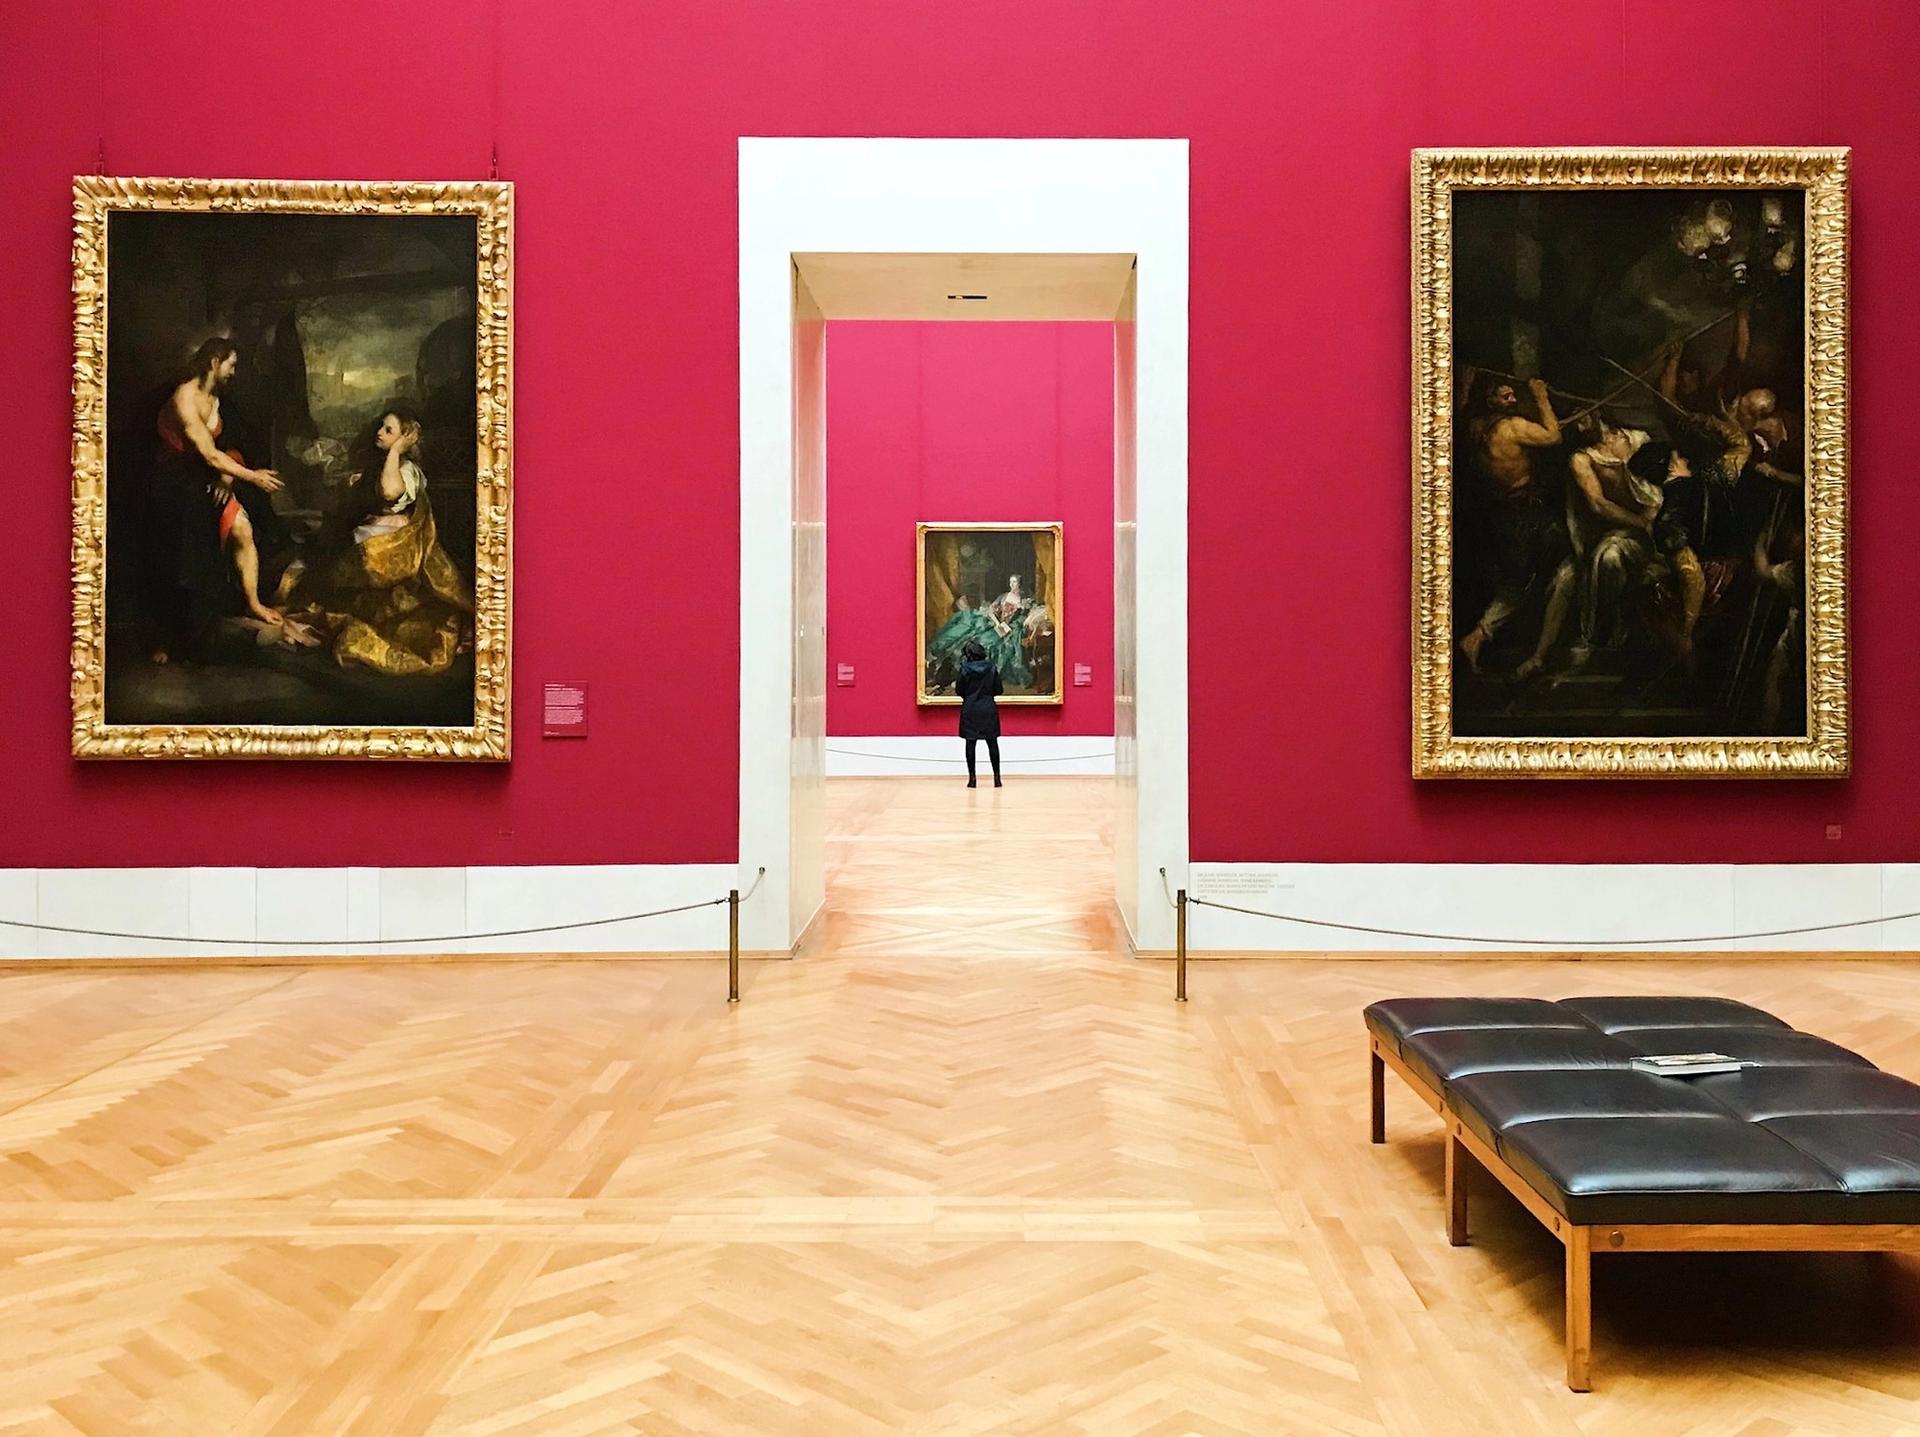 The Alte Pinakothek's rooms were filled with masterpieces I thought I knew from images, but which astonished me each time Photo: Mark Pegrum